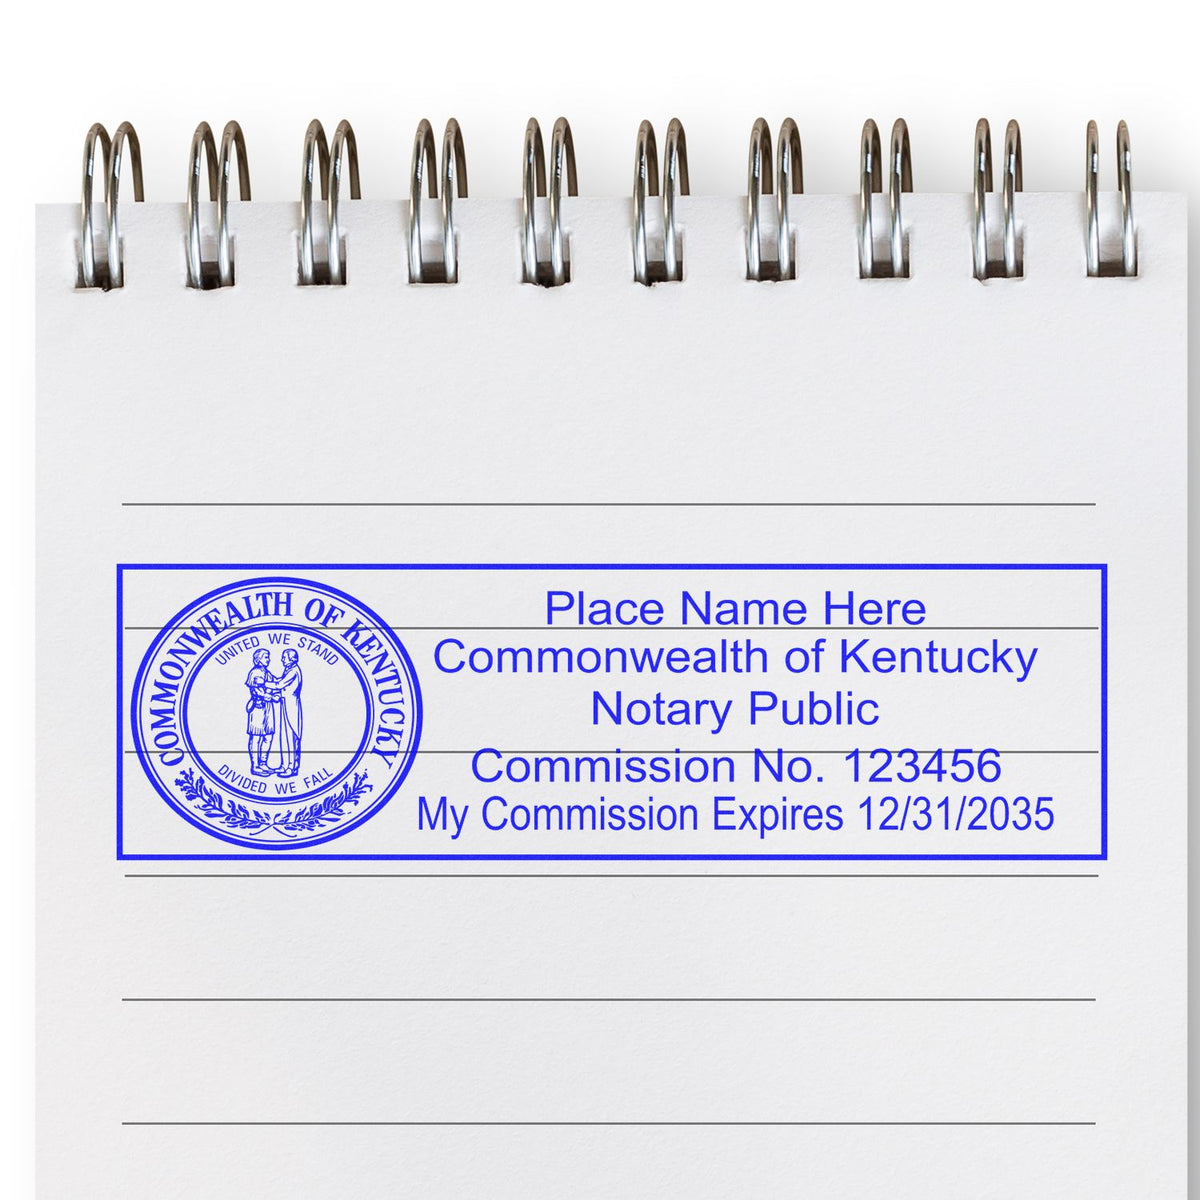 The MaxLight Premium Pre-Inked Kentucky State Seal Notarial Stamp stamp impression comes to life with a crisp, detailed photo on paper - showcasing true professional quality.